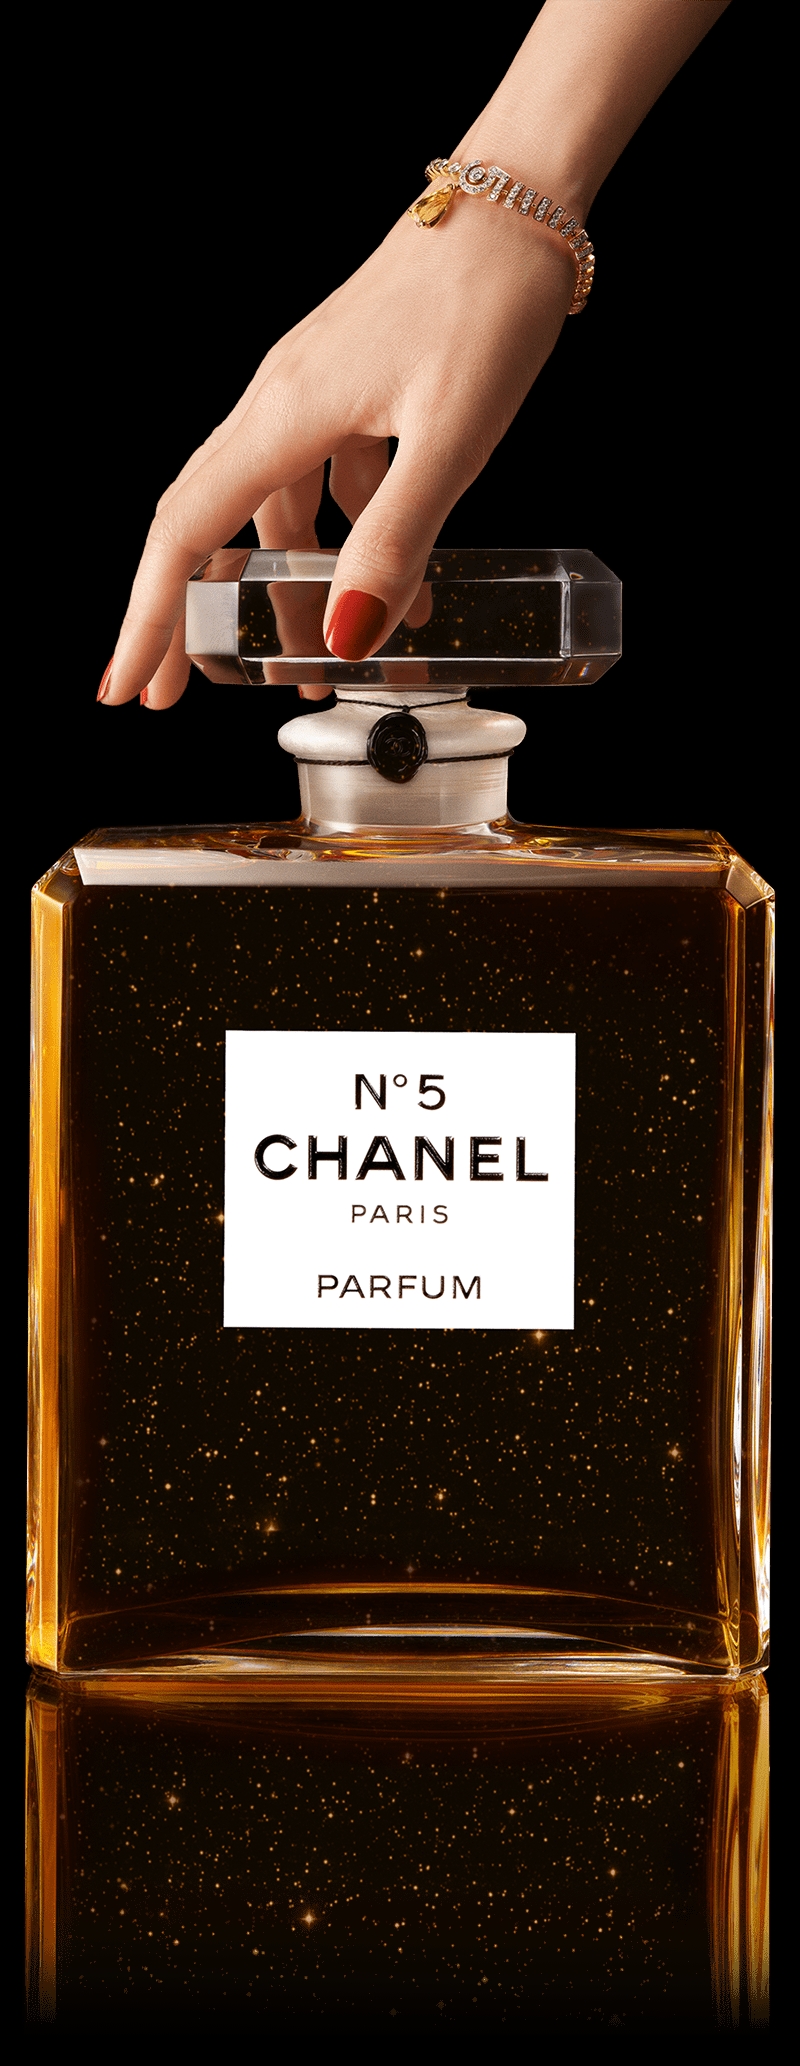 Holiday countdown: Chanel is celebrating N°5 with a monumental XXL ...